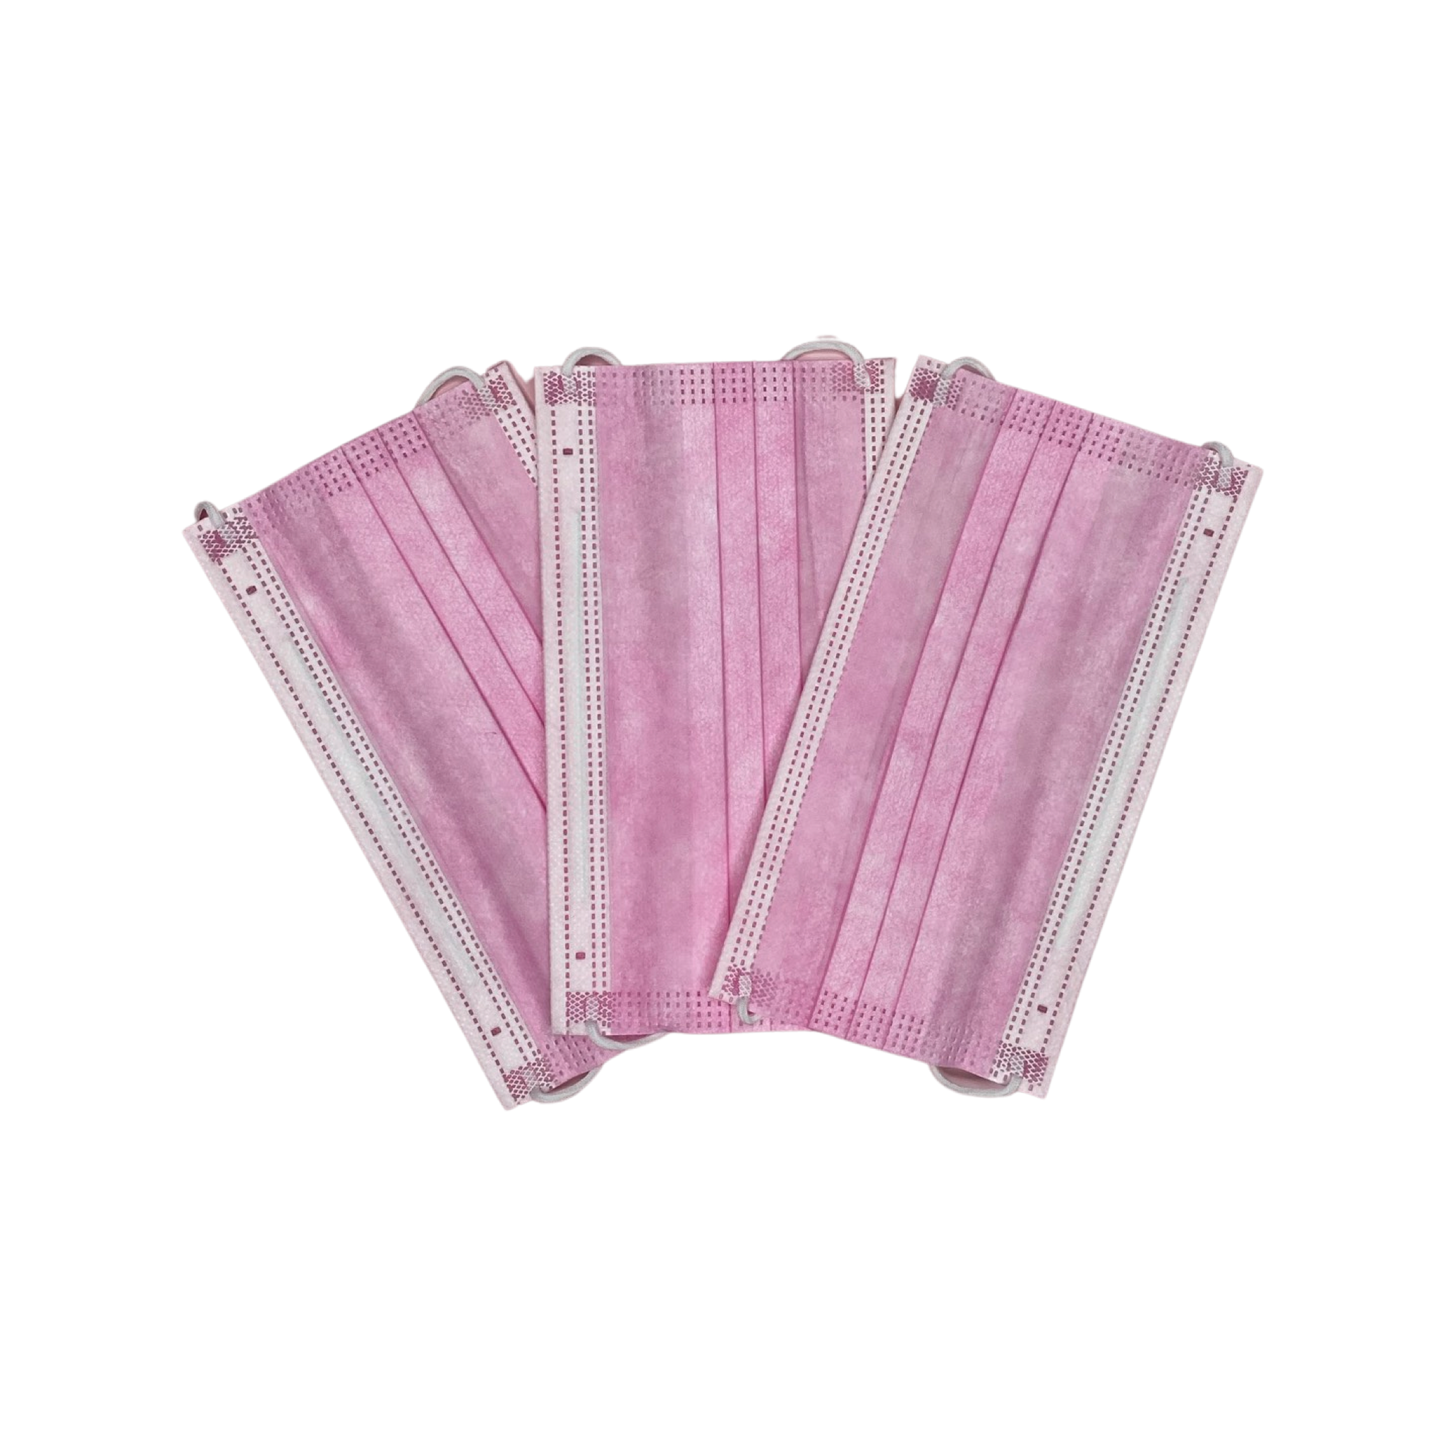 Three pink and white disposable face masks lying flat slightly stacked on top of each other. 